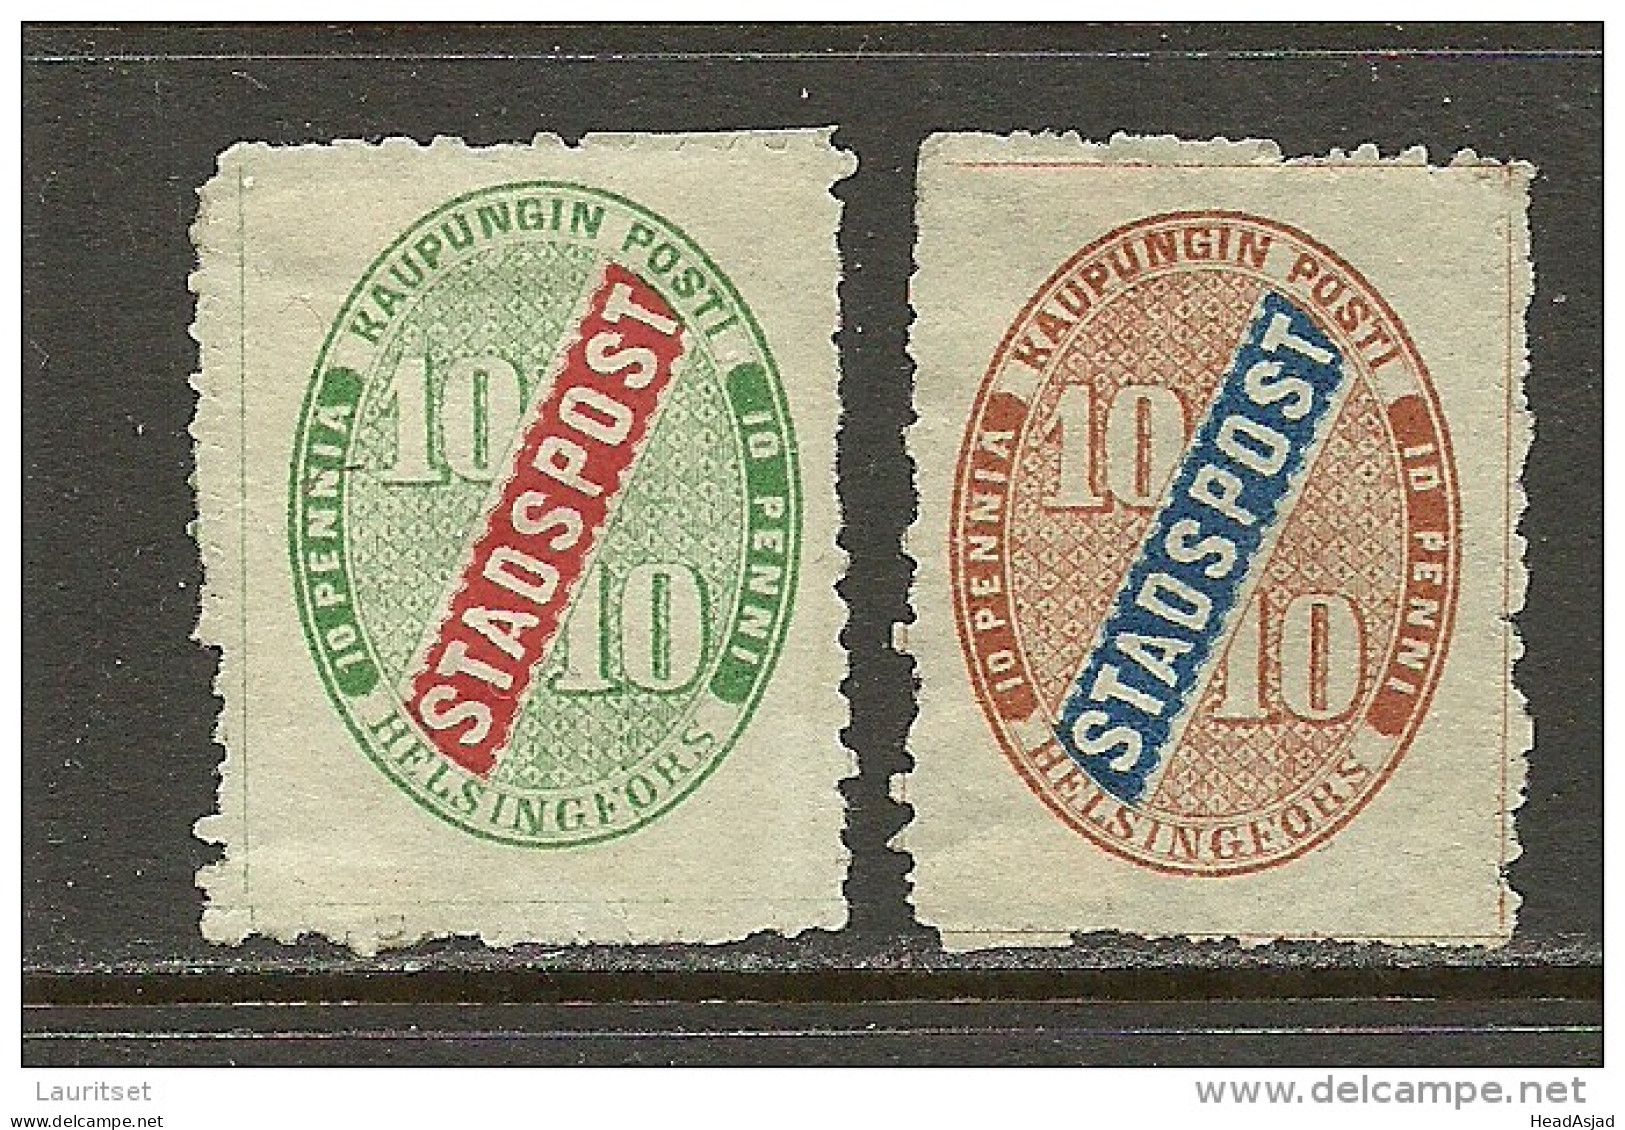 FINLAND HELSINKI 1866/68 Local City Post Stadtpost (*) - Local Post Stamps